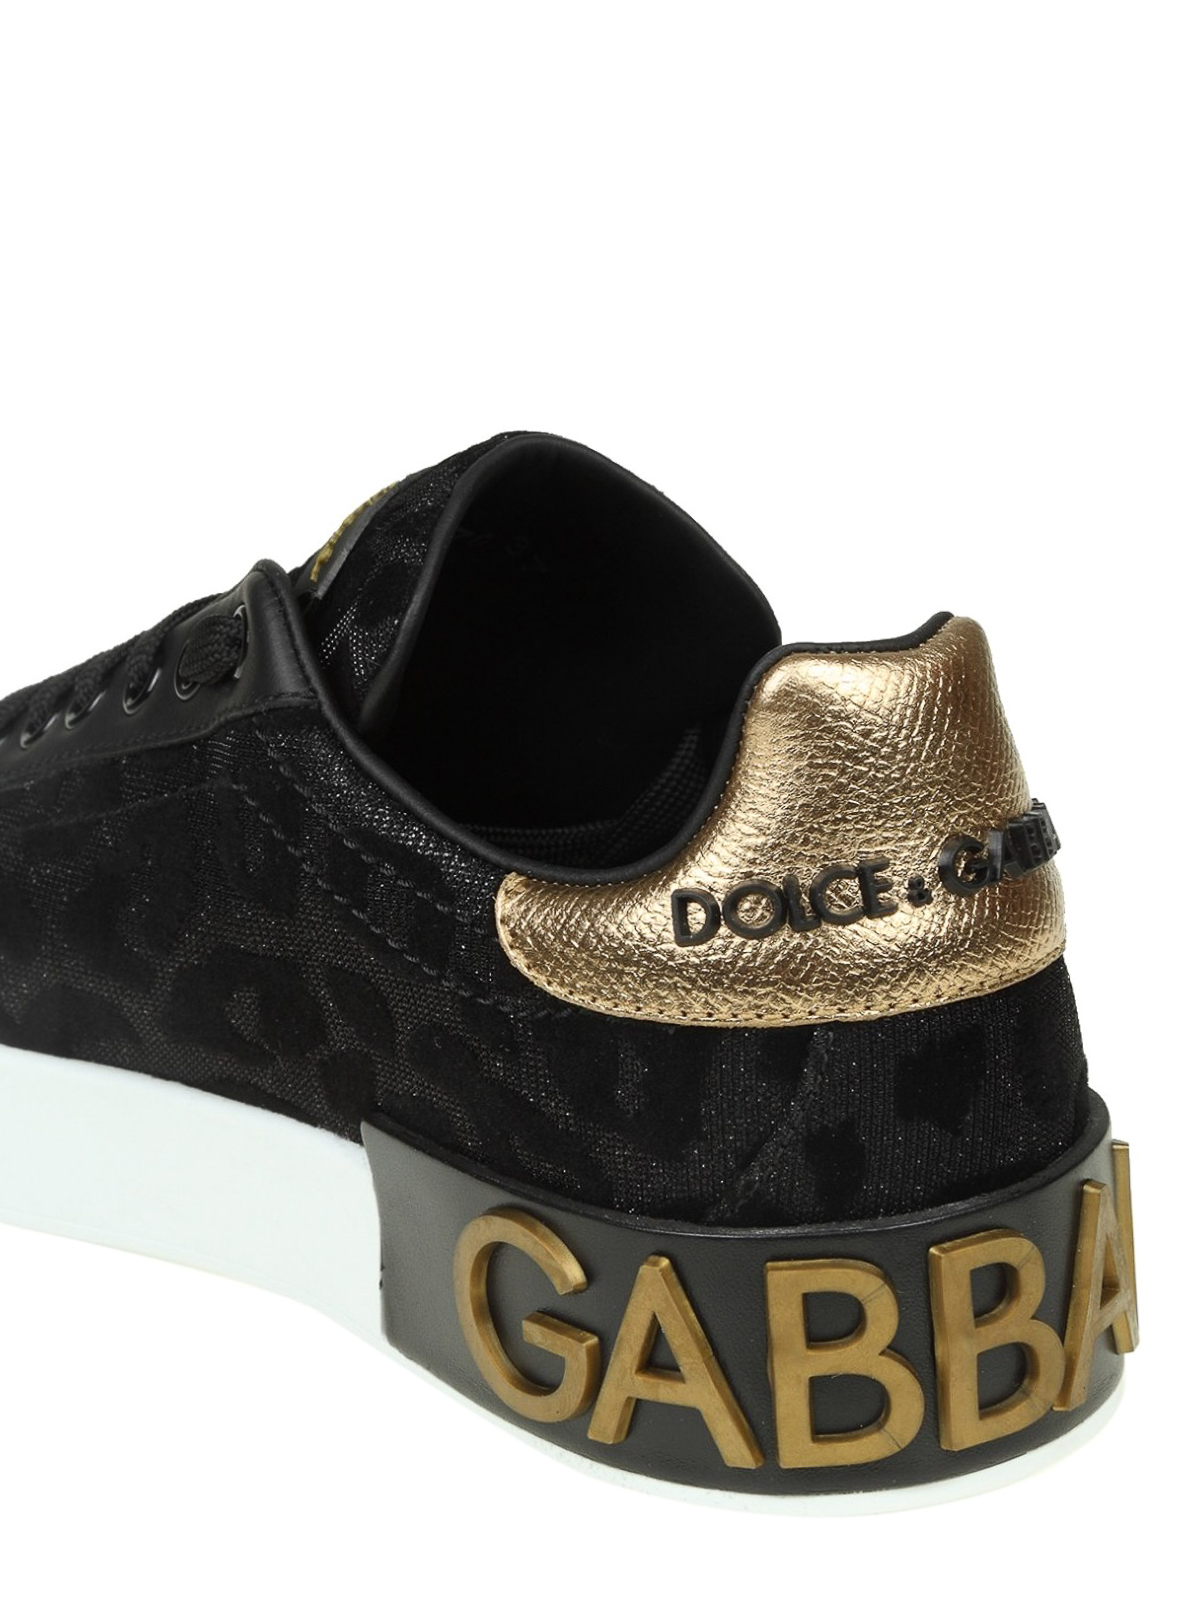 dolce and gabbana gold trainers